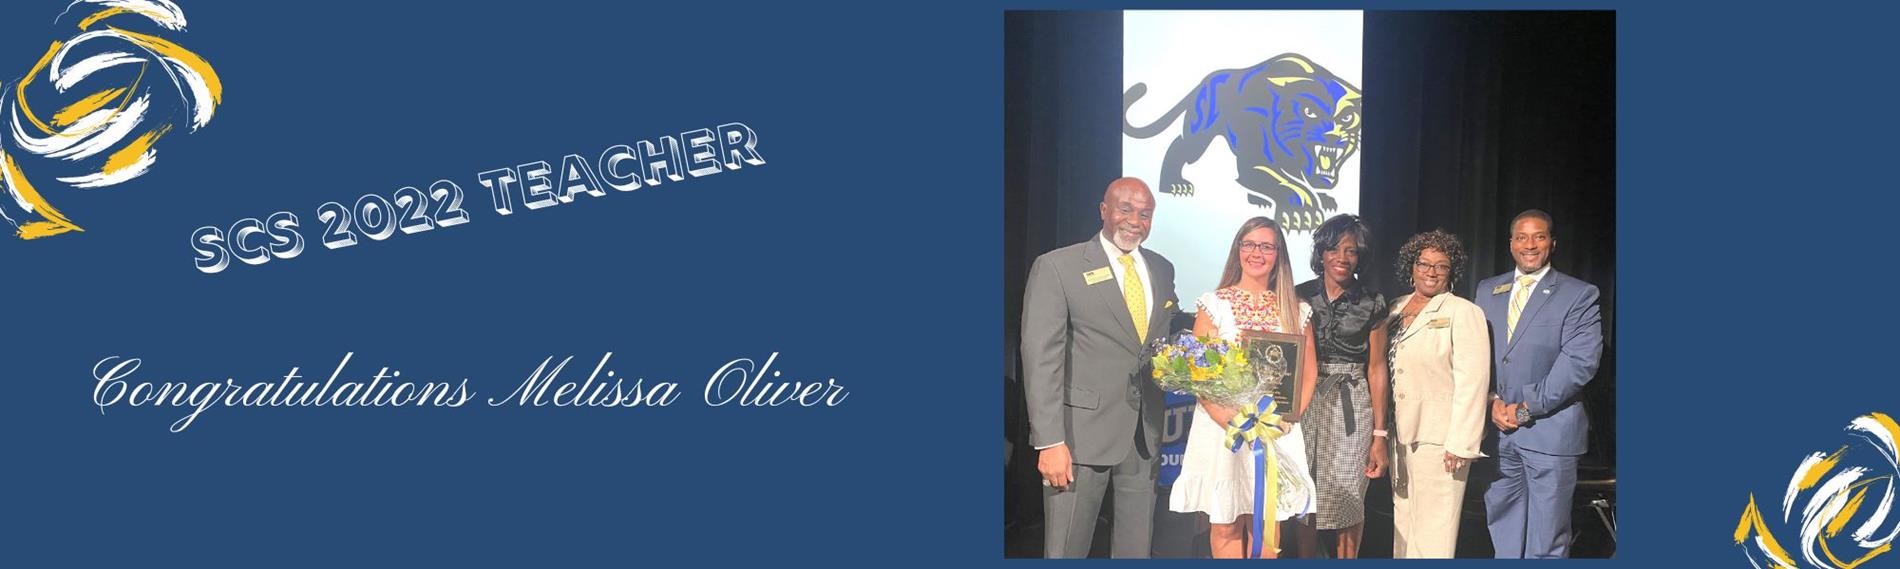 SCS Teacher of the Year - Melissa Oliver